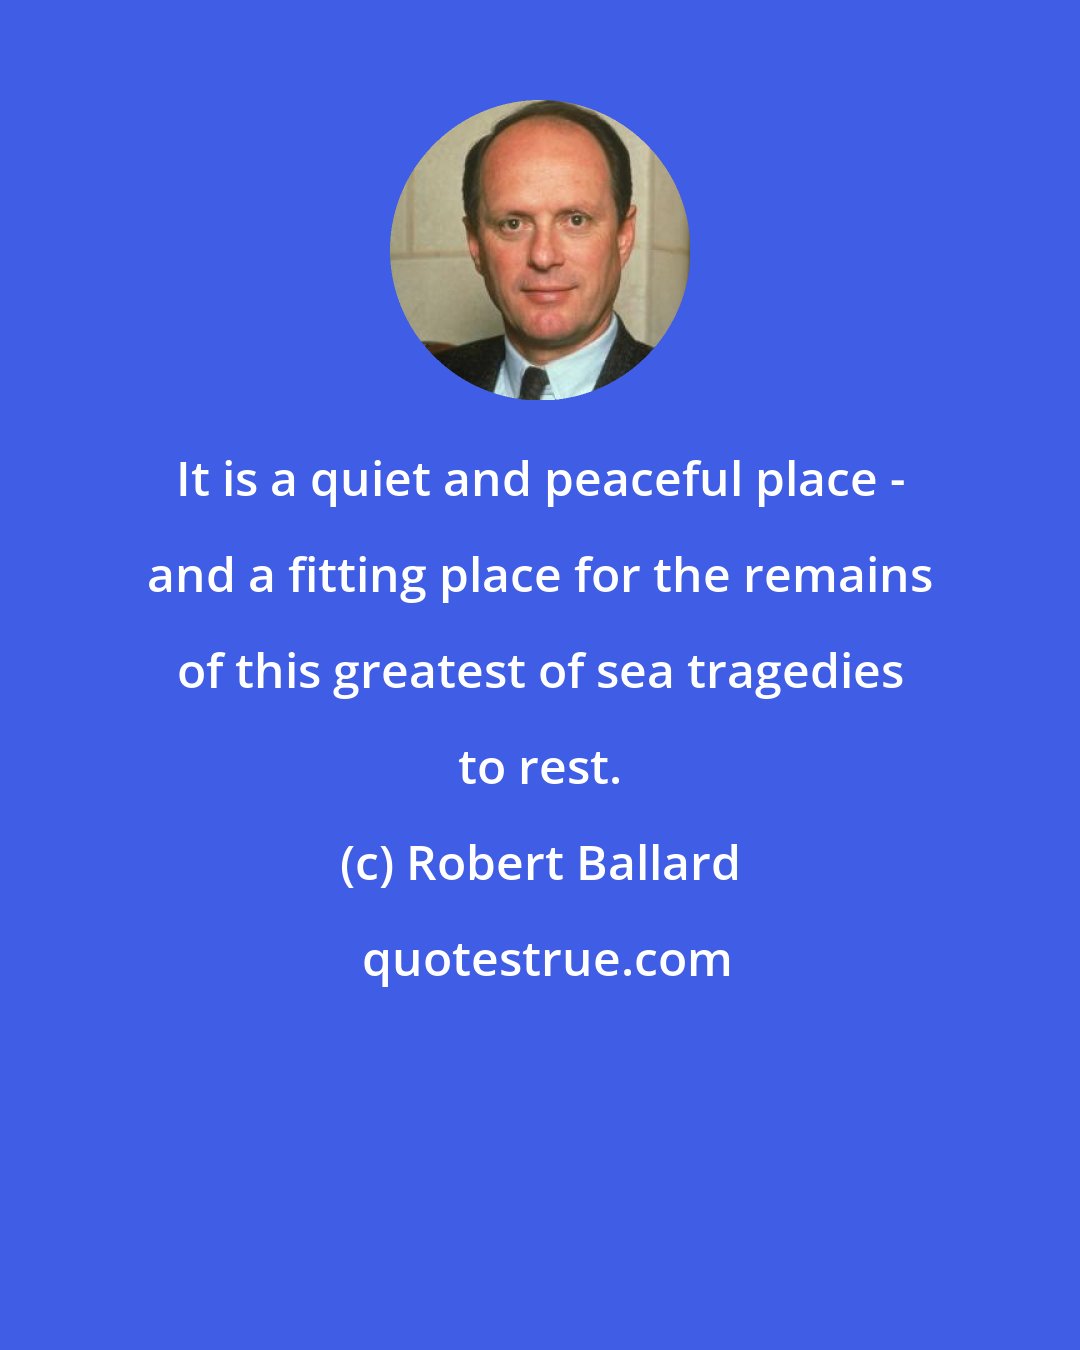 Robert Ballard: It is a quiet and peaceful place - and a fitting place for the remains of this greatest of sea tragedies to rest.